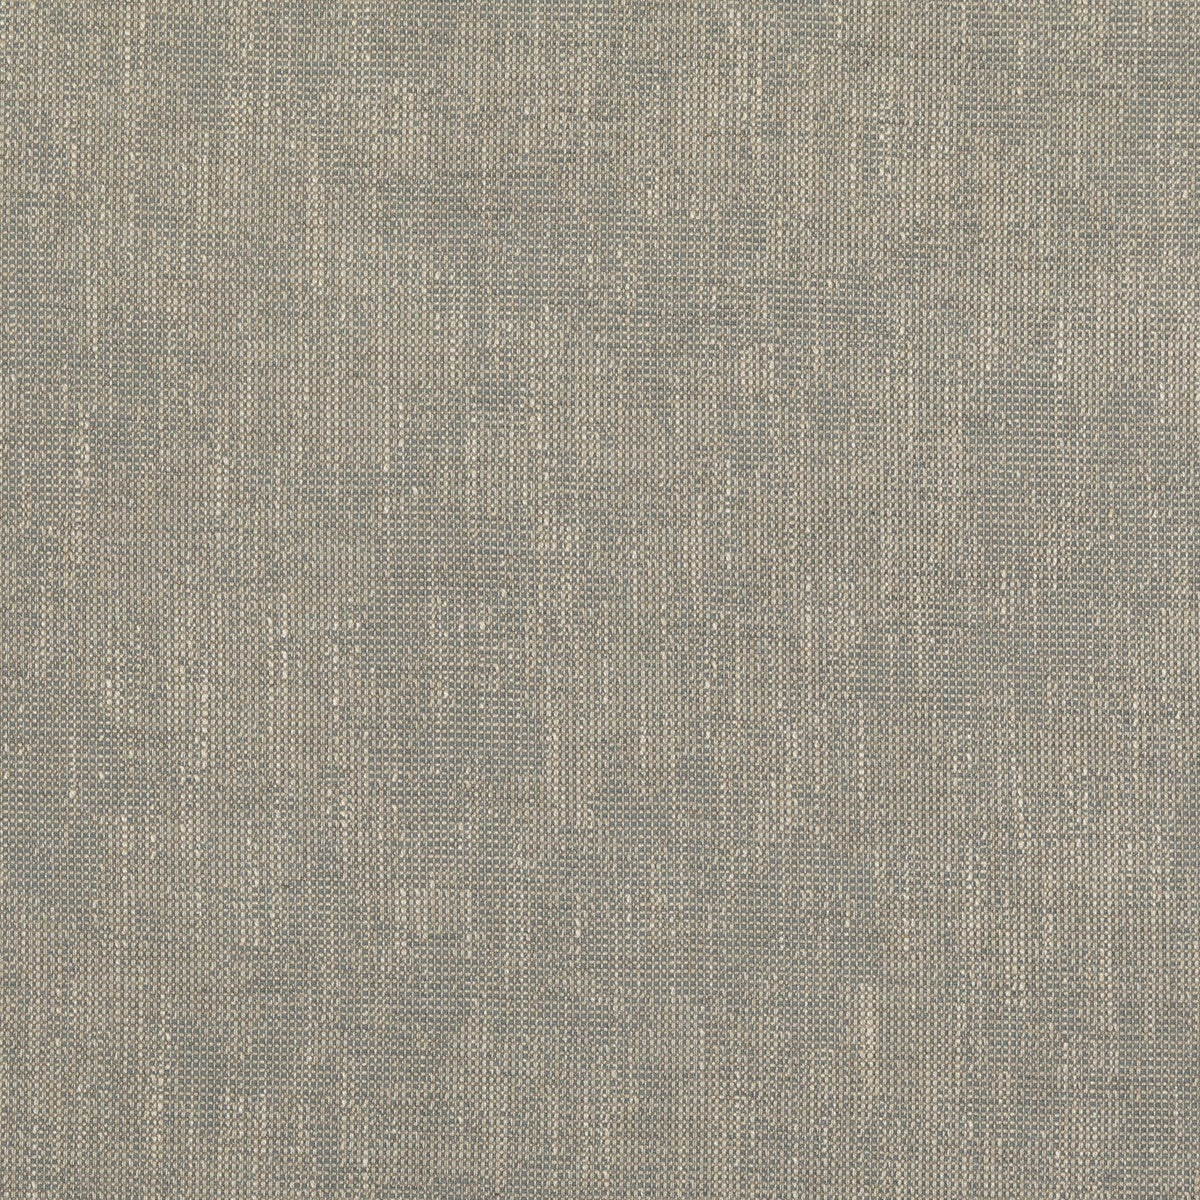 Bower fabric in pebble color - pattern PF50489.930.0 - by Baker Lifestyle in the Block Weaves collection